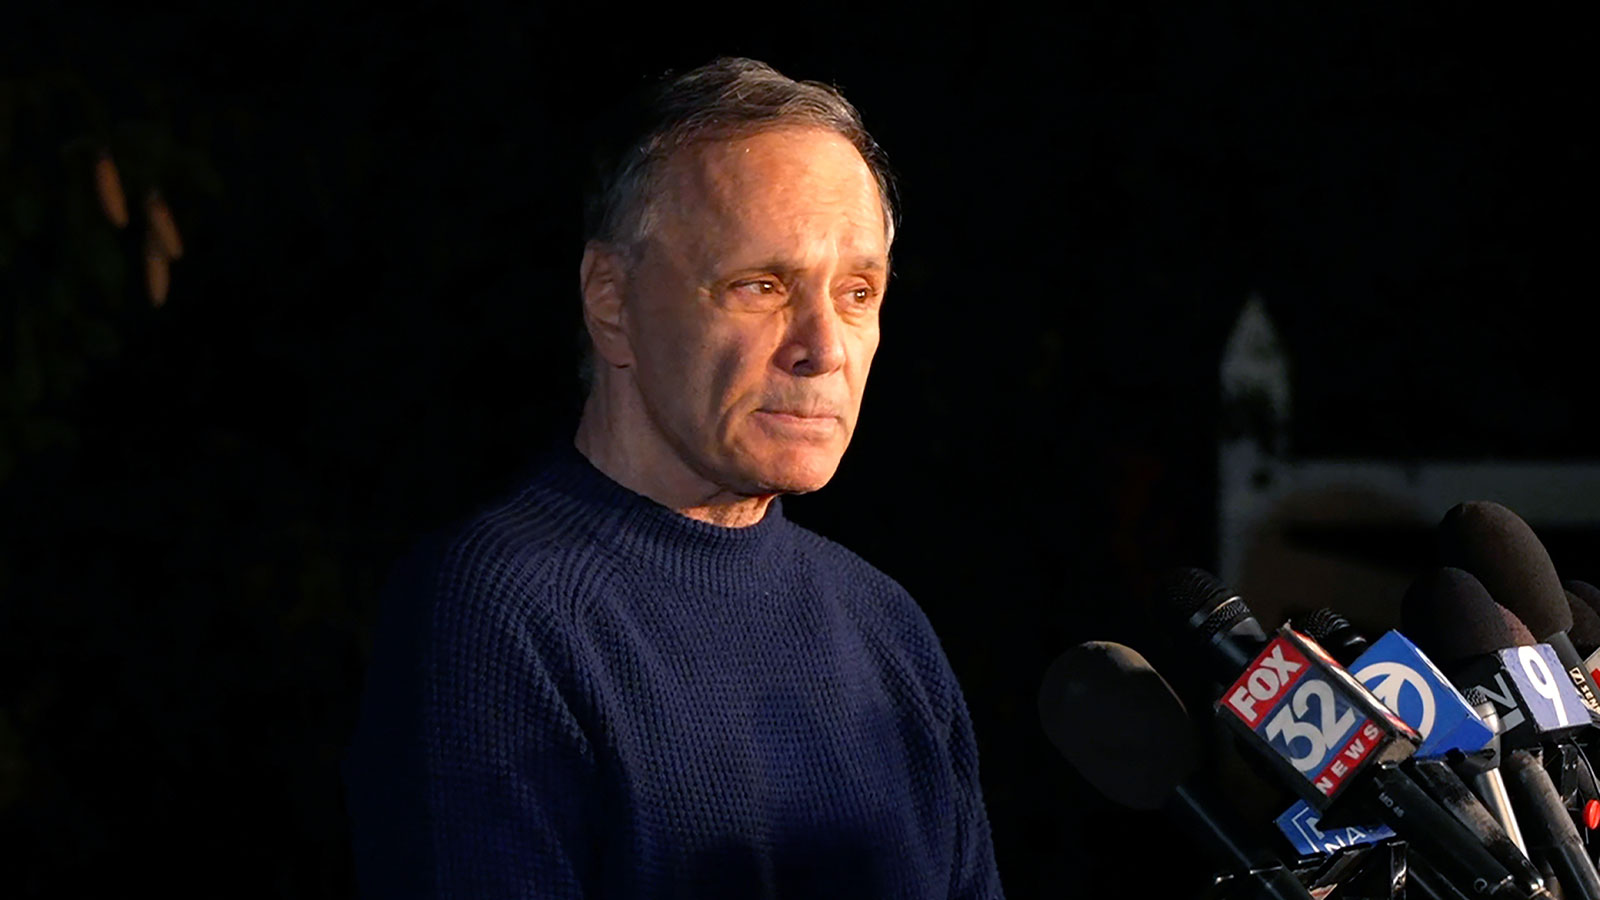 Uri Raanan, the father of Natalie Raanan, one of the American hostages released Friday by Hamas, speaks during a press conference on Friday, October 20.